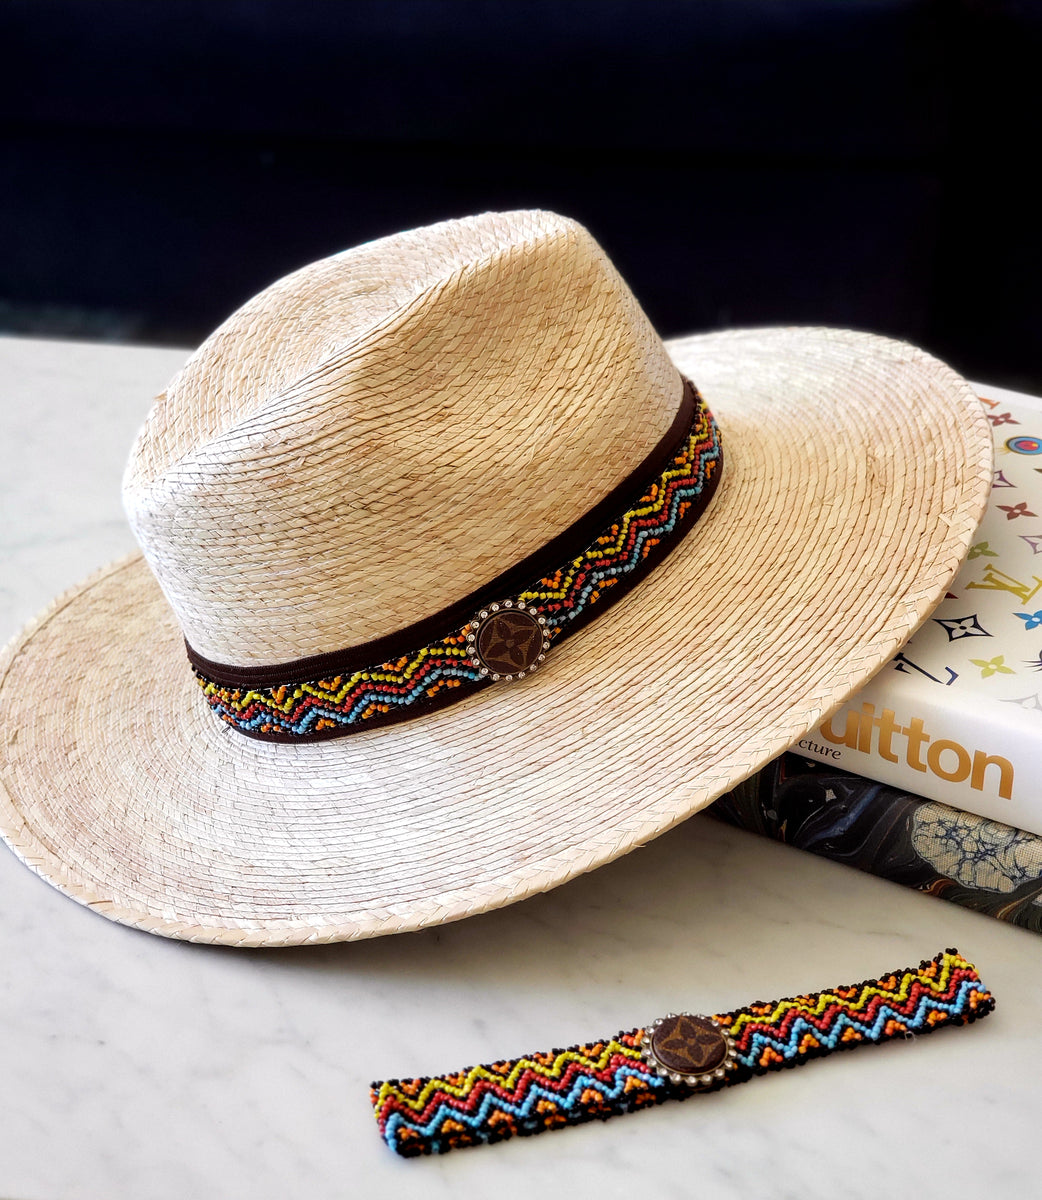 Louis Vuitton hat band – The Boujee Gypsy